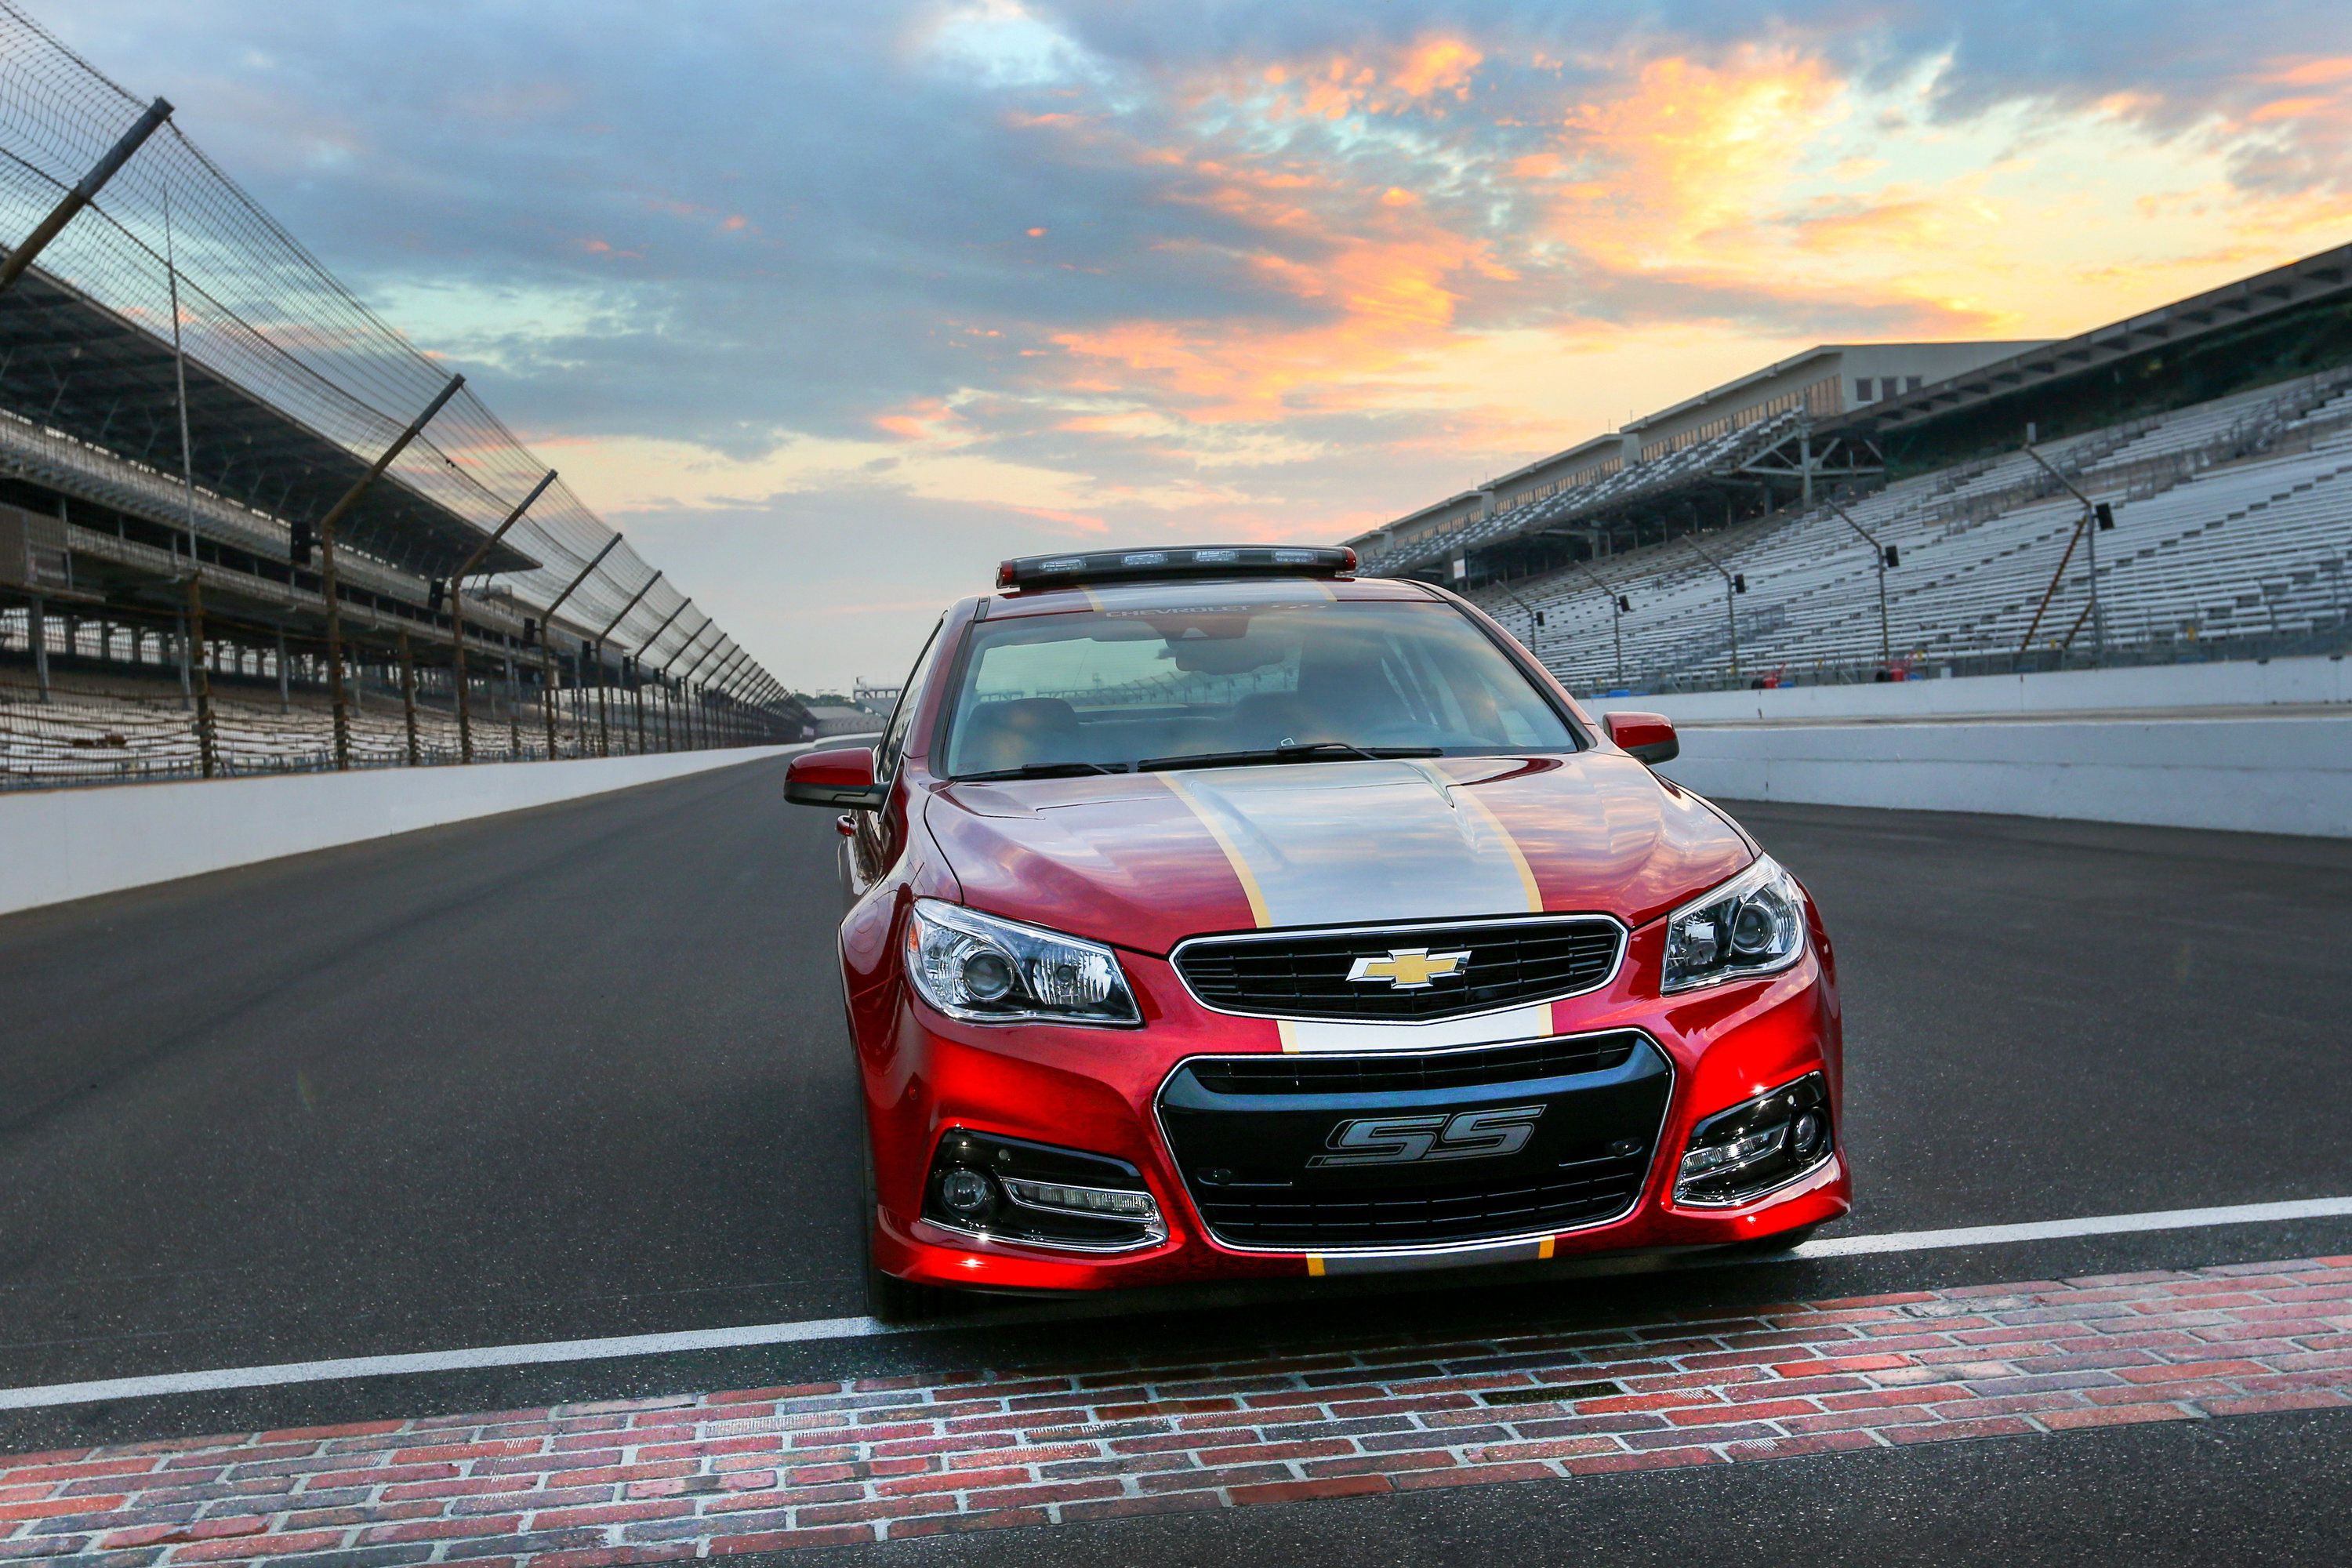 2014 Chevrolet SS Pace Car